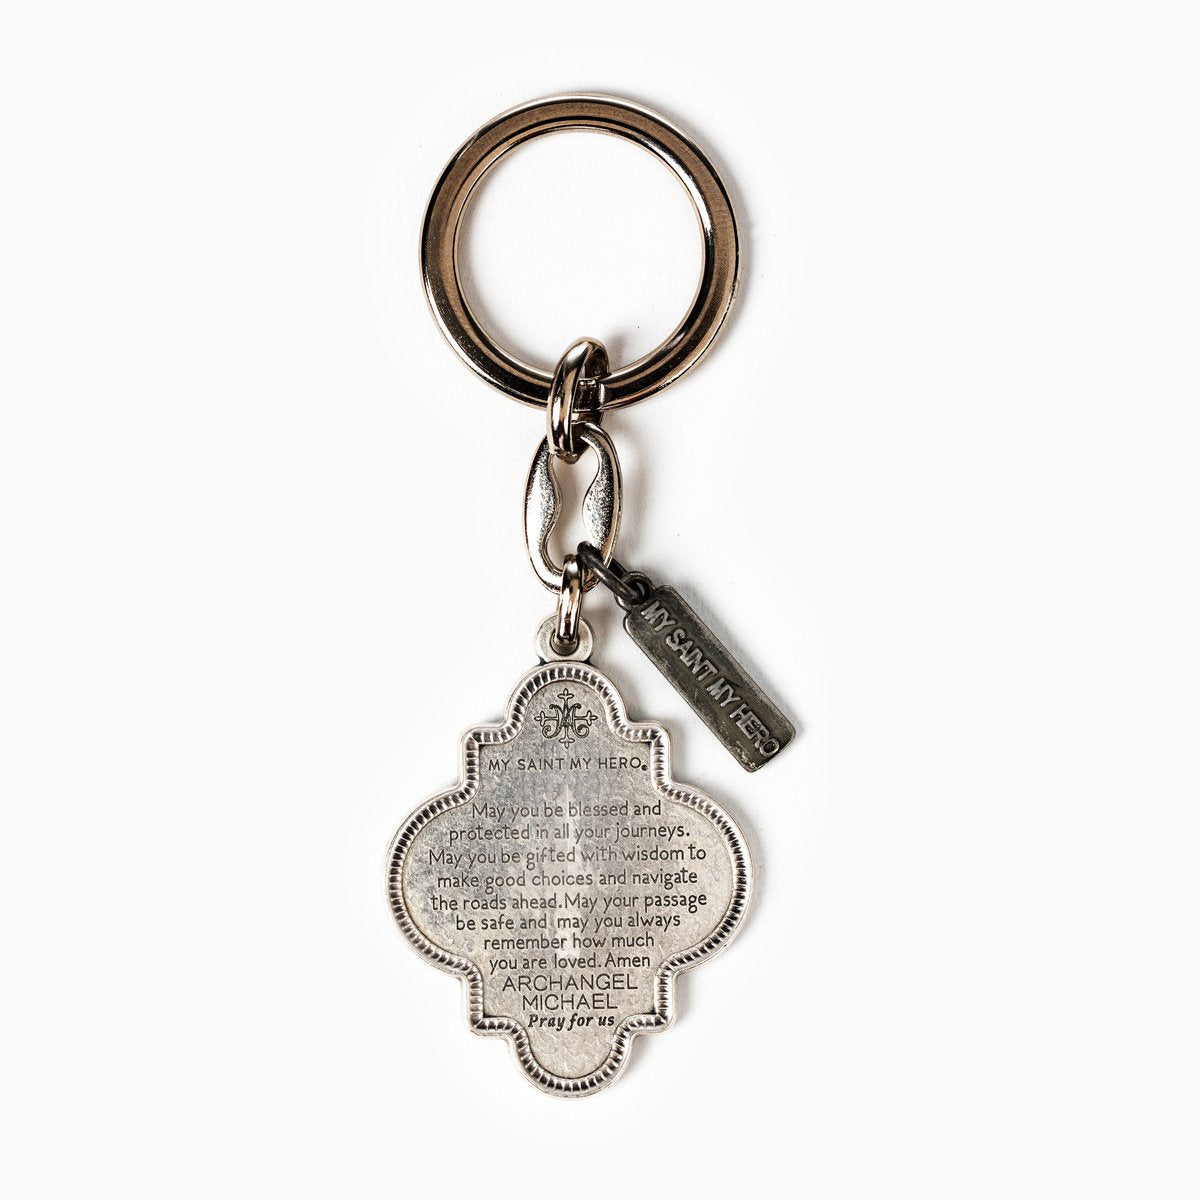 Archangel Michael Armor of Protection Keyring - Prayer to Archangel Michael on the back